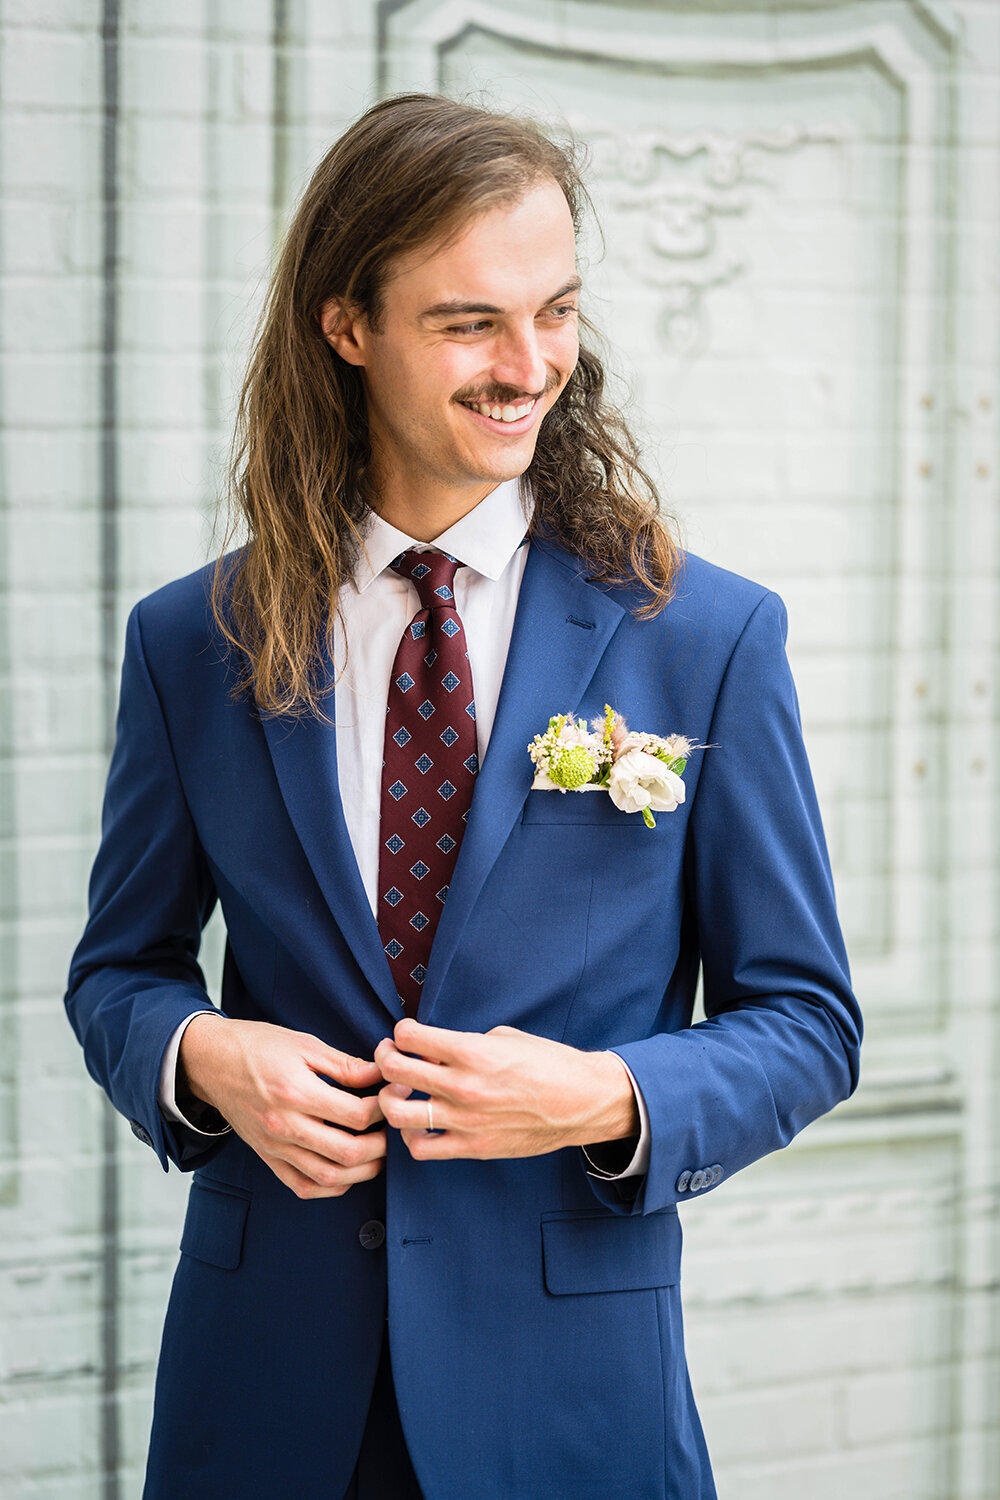 A marrier in a navy suit buttons his top button on his suit jacket and smiles towards something behind the photographer (not photographed) on his elopement day in Roanoke, Virginia.